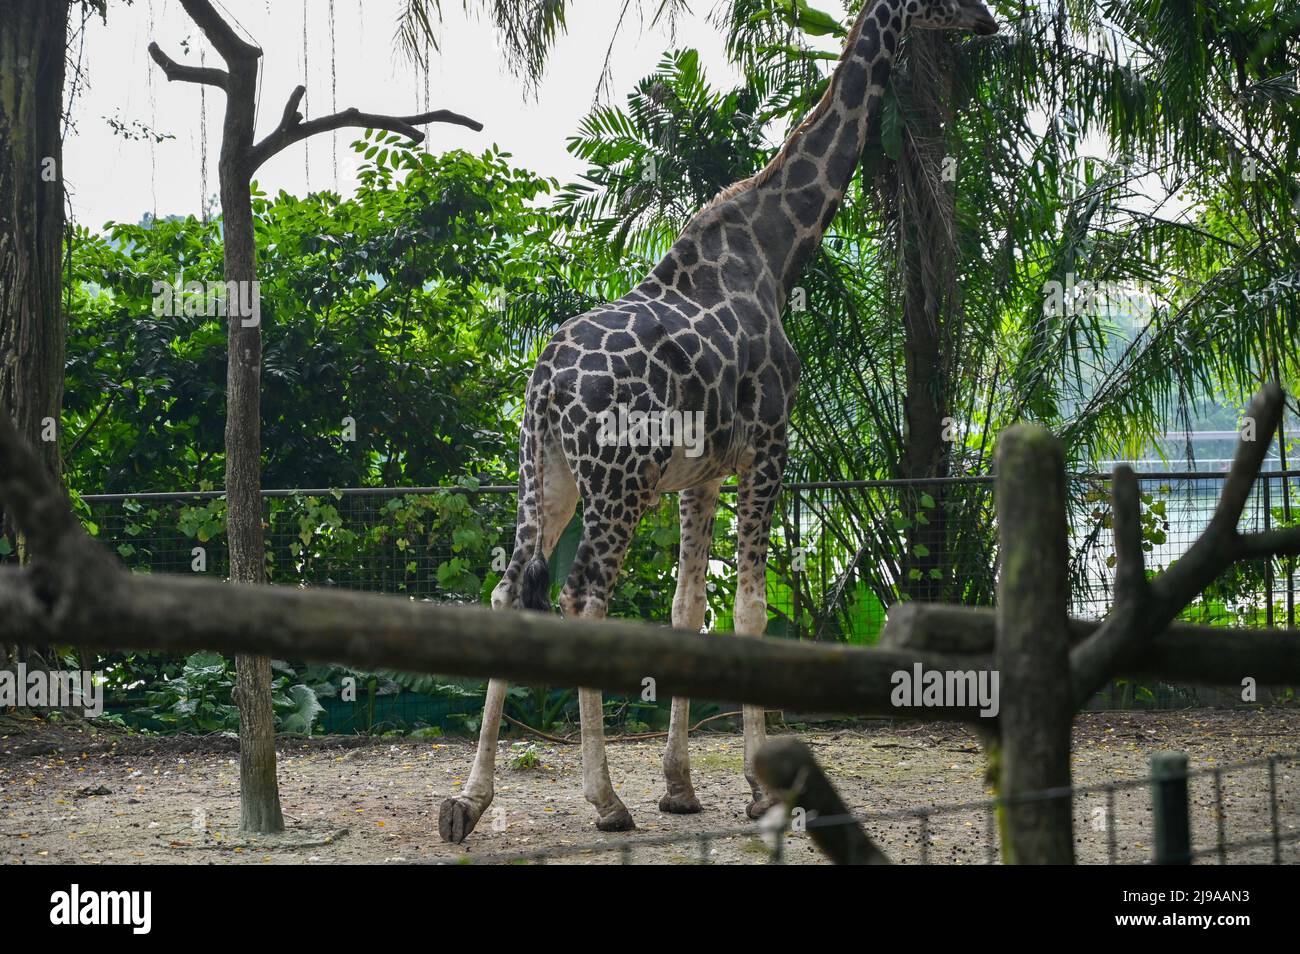 Giraffe : a tall African hoofed mammal belonging to the genus Giraffa. It is the tallest living terrestrial animal and the largest ruminant on Earth. Stock Photo